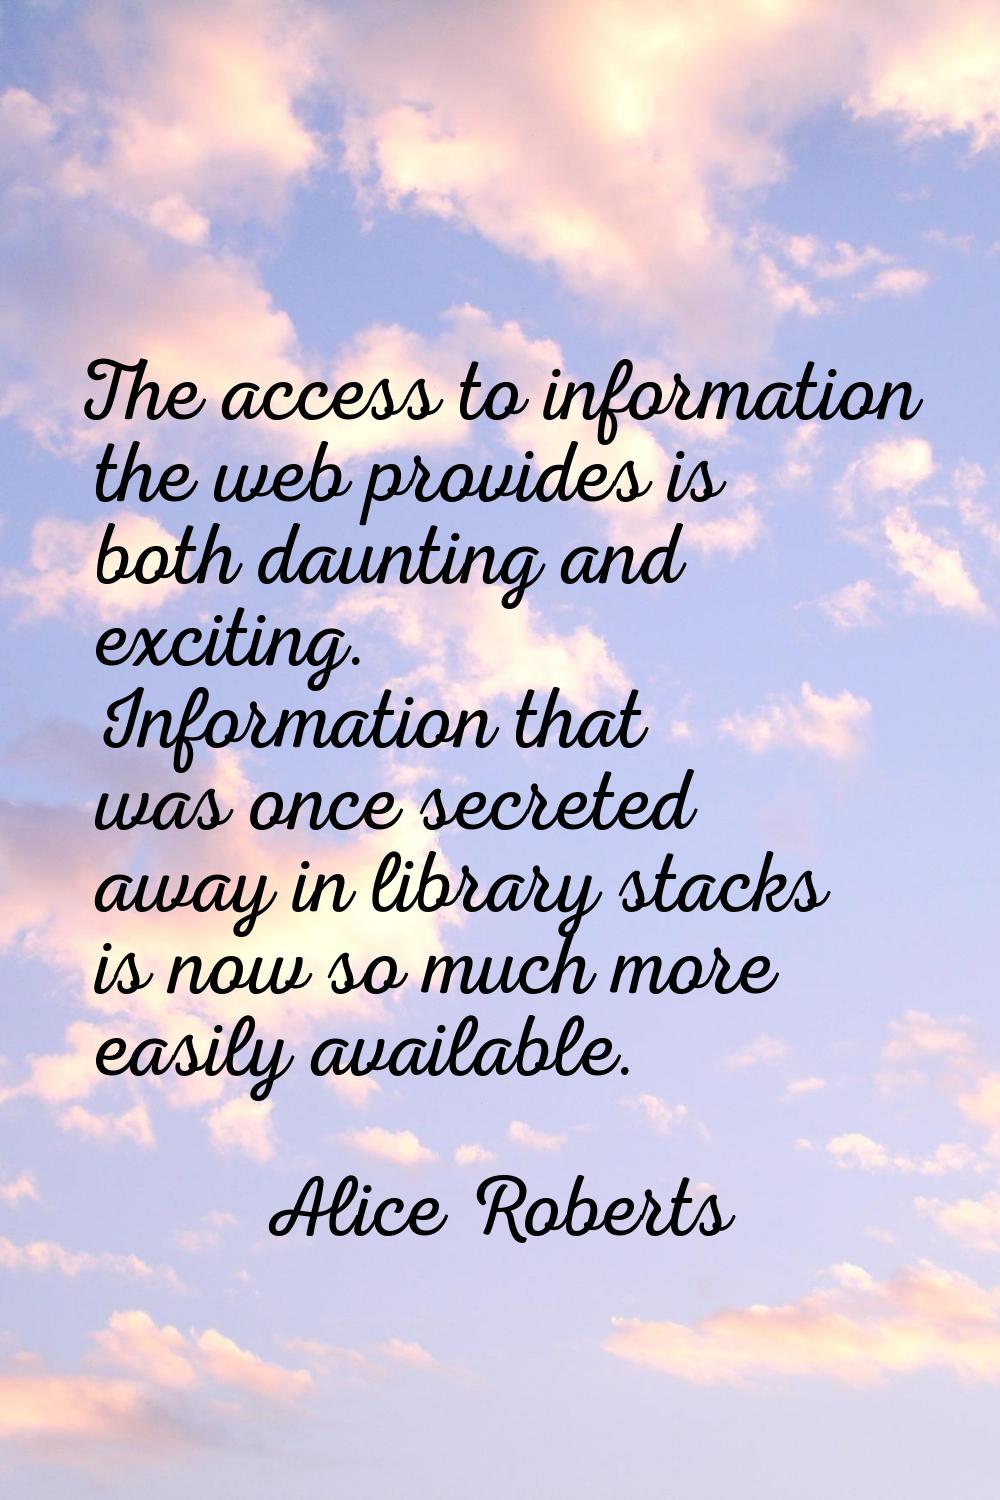 The access to information the web provides is both daunting and exciting. Information that was once